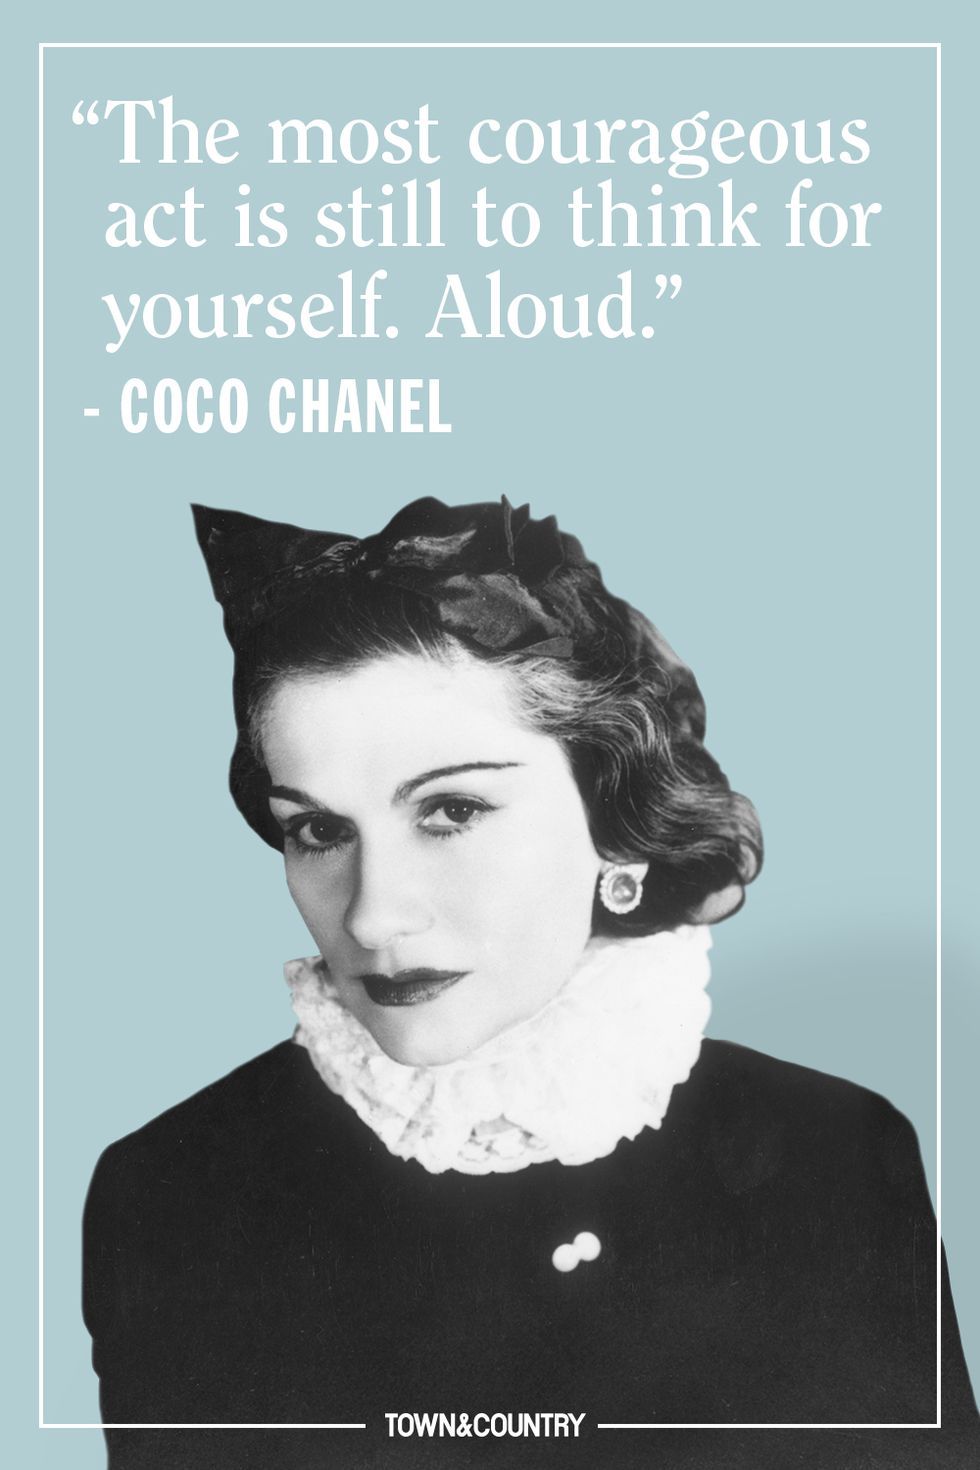 20 Coco Chanel Quotes - Be Kitschig